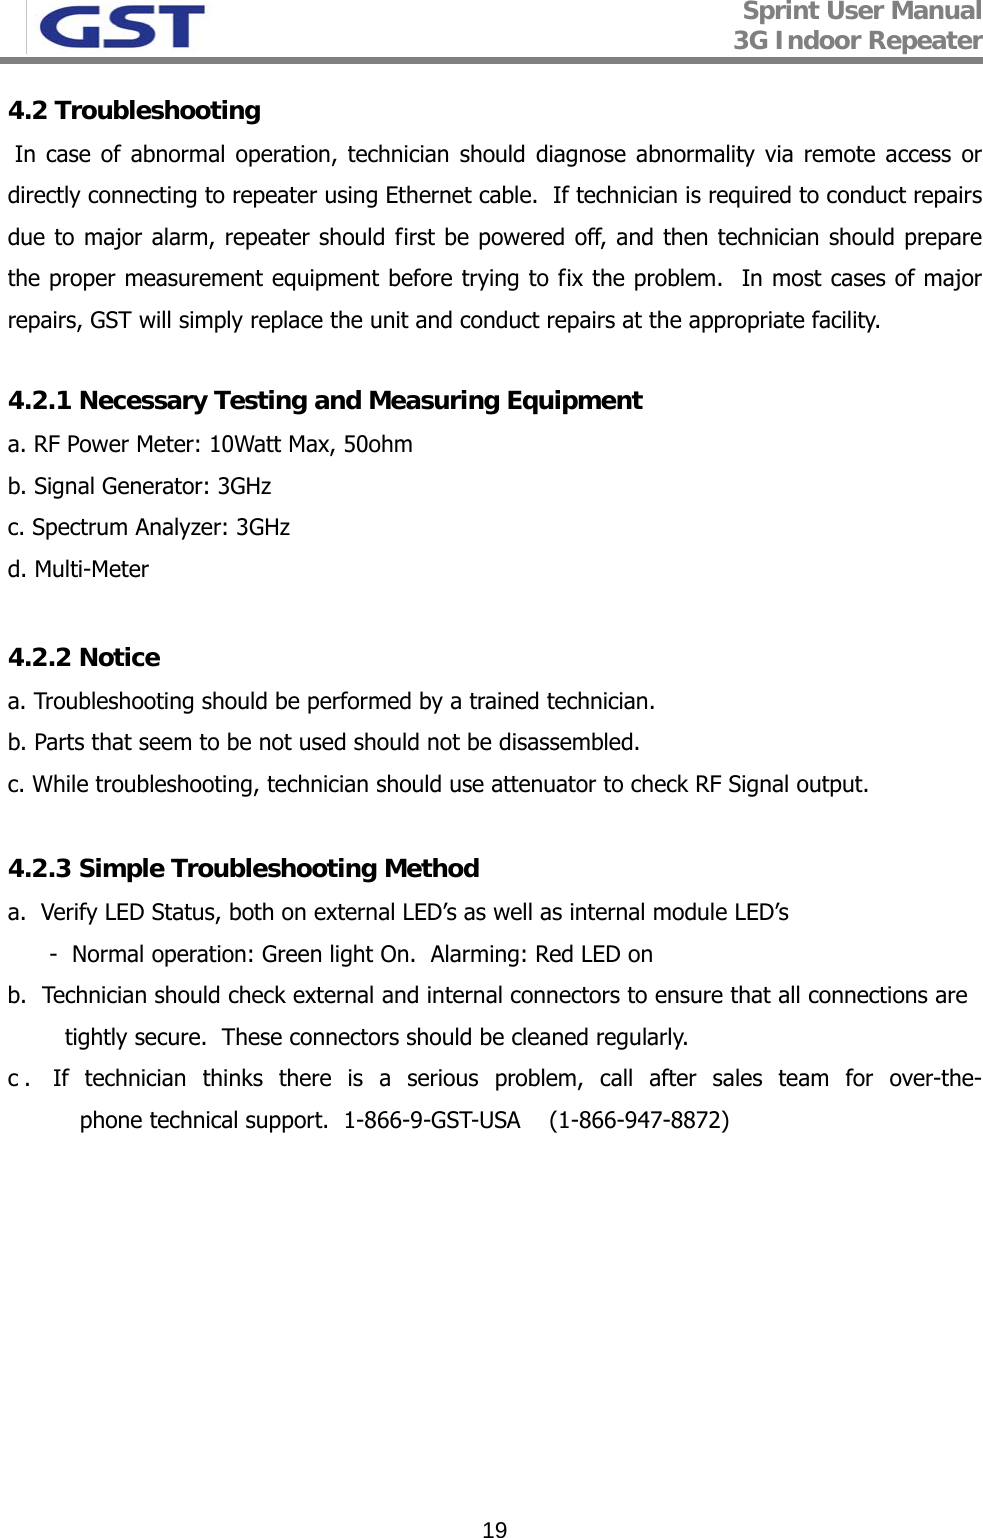 Sprint User Manual 3G Indoor Repeater   194.2 Troubleshooting  In case of abnormal operation, technician should diagnose abnormality via remote access or directly connecting to repeater using Ethernet cable.  If technician is required to conduct repairs due to major alarm, repeater should first be powered off, and then technician should prepare the proper measurement equipment before trying to fix the problem.  In most cases of major repairs, GST will simply replace the unit and conduct repairs at the appropriate facility.  4.2.1 Necessary Testing and Measuring Equipment a. RF Power Meter: 10Watt Max, 50ohm b. Signal Generator: 3GHz c. Spectrum Analyzer: 3GHz d. Multi-Meter  4.2.2 Notice a. Troubleshooting should be performed by a trained technician. b. Parts that seem to be not used should not be disassembled.  c. While troubleshooting, technician should use attenuator to check RF Signal output.  4.2.3 Simple Troubleshooting Method a.  Verify LED Status, both on external LED’s as well as internal module LED’s -  Normal operation: Green light On.  Alarming: Red LED on  b.  Technician should check external and internal connectors to ensure that all connections are  tightly secure.  These connectors should be cleaned regularly.  c. If technician thinks there is a serious problem, call after sales team for over-the-phone technical support.  1-866-9-GST-USA    (1-866-947-8872) 